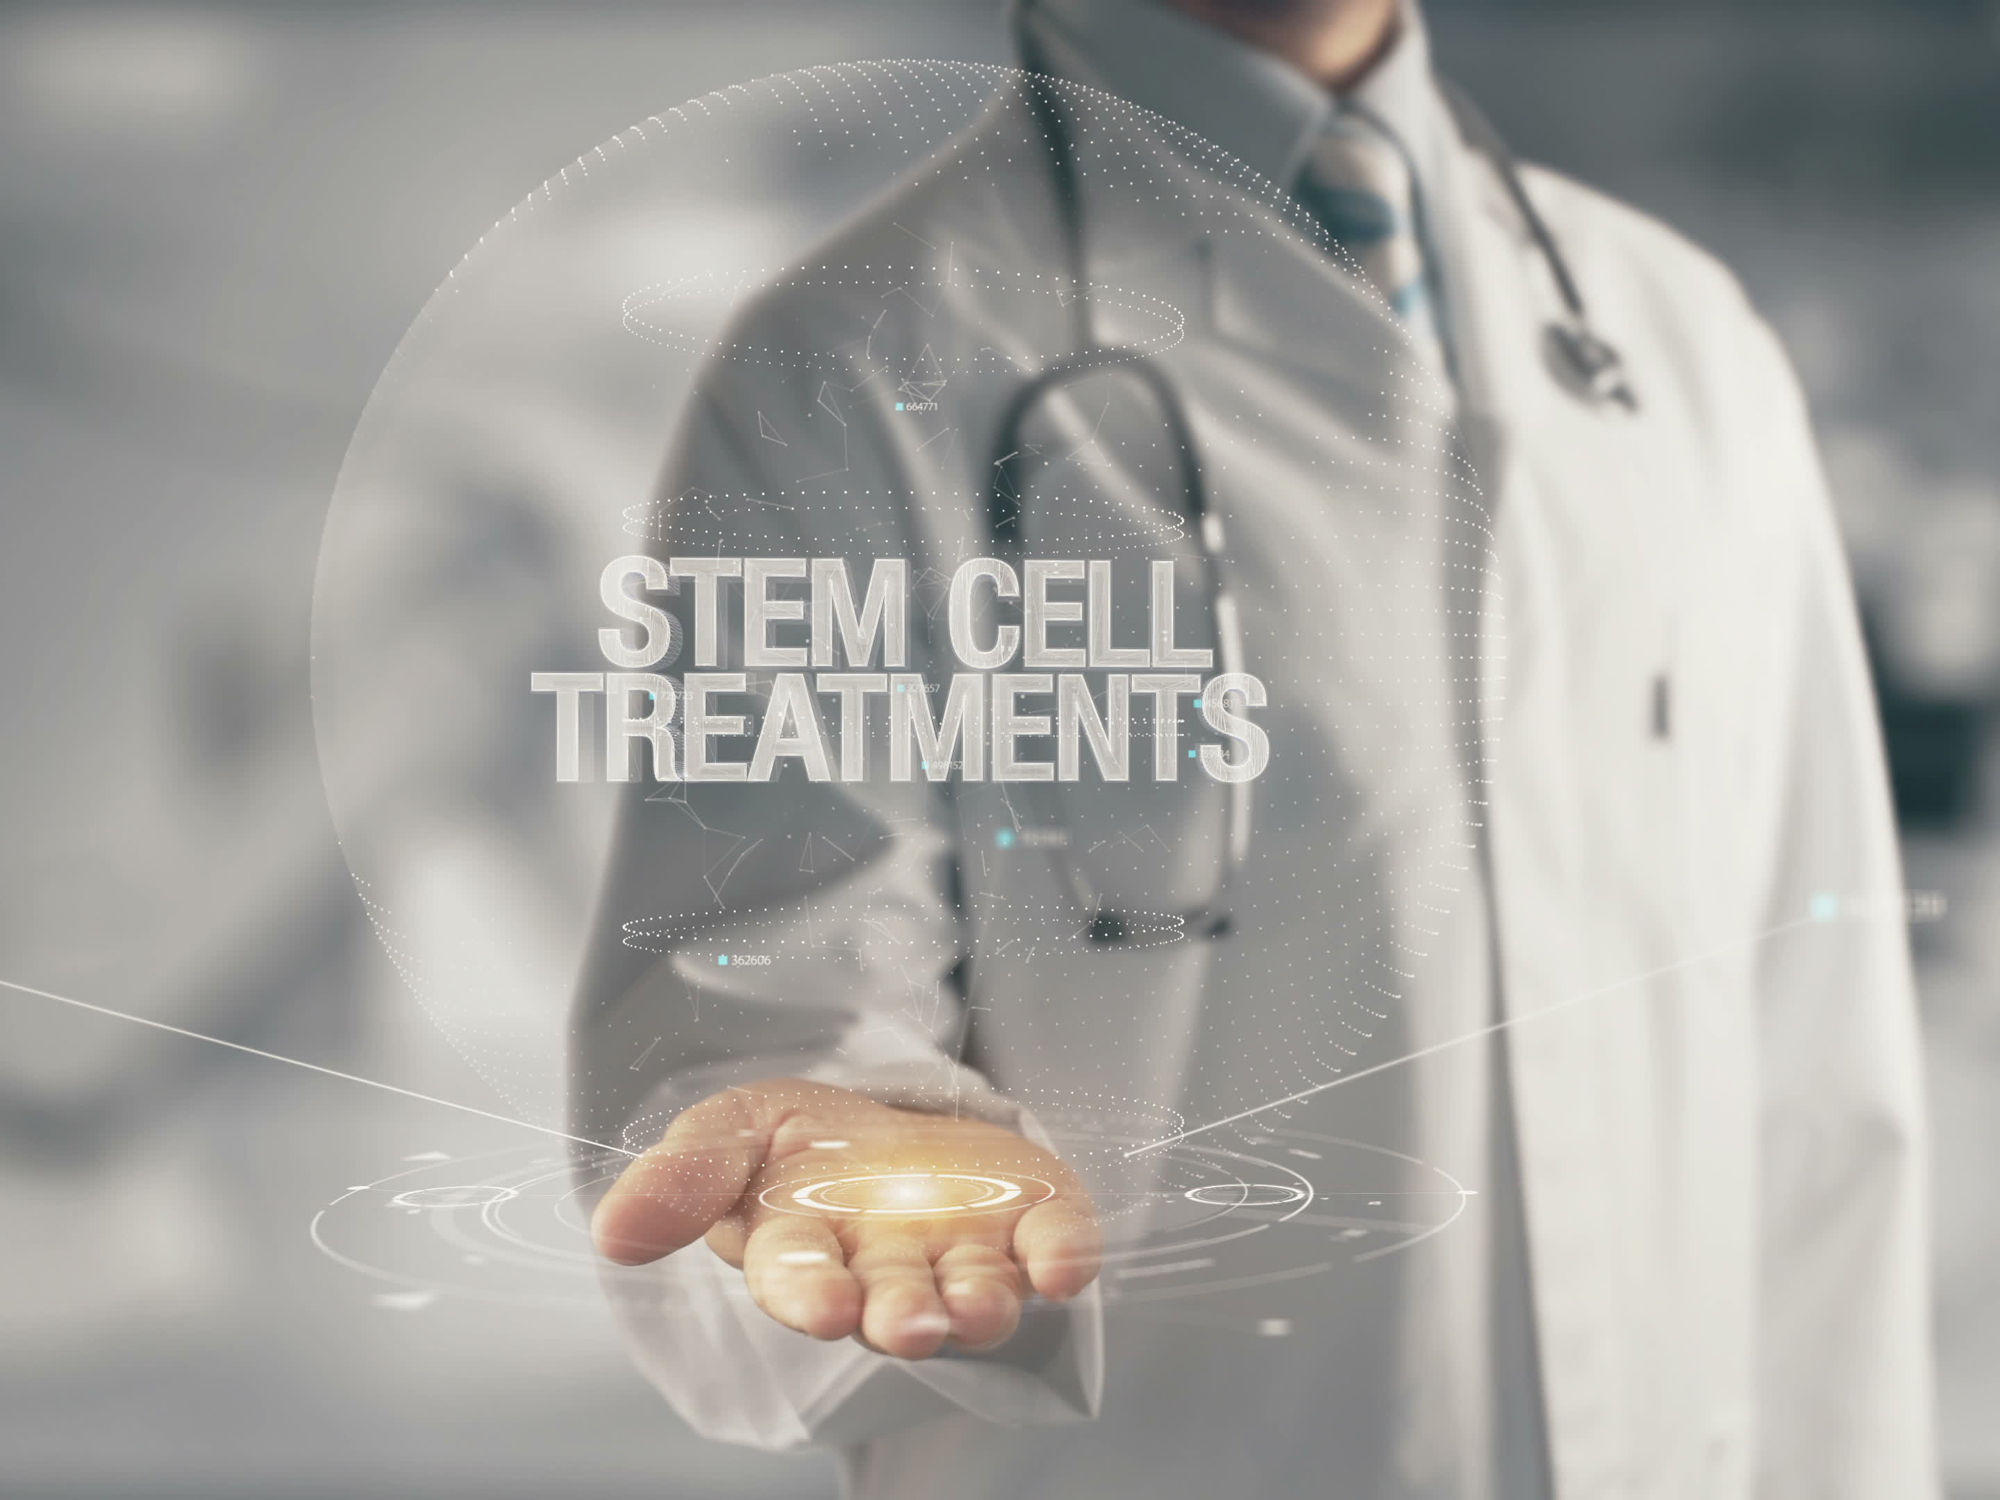 Restoring health: The latest in stem cell therapies